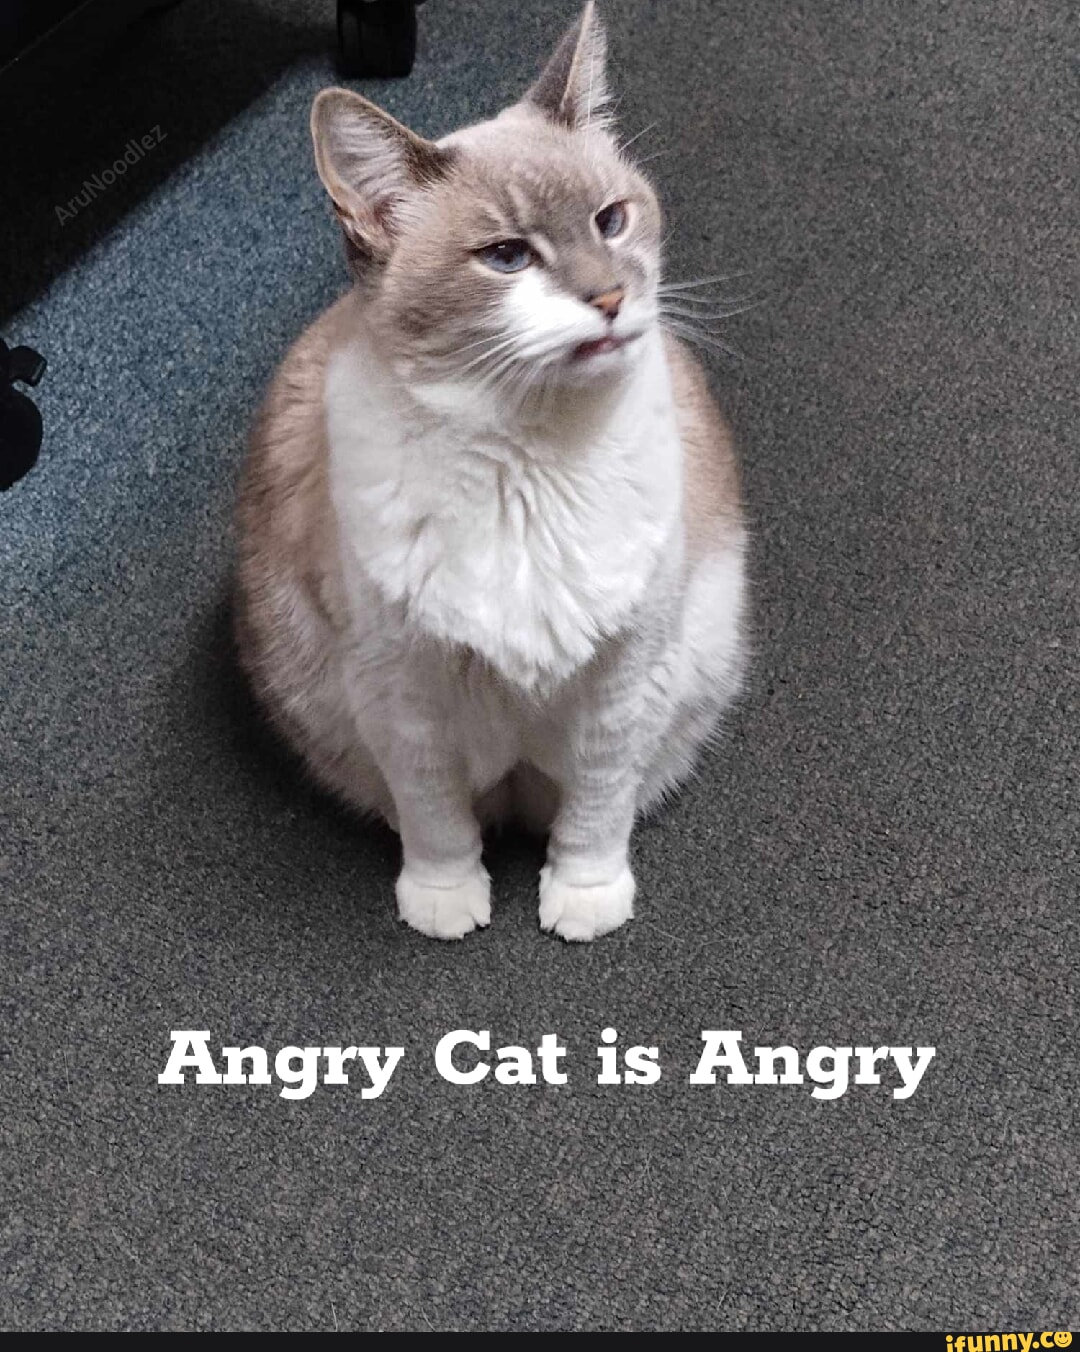 Lolcats - angry - LOL at Funny Cat Memes - Funny cat pictures with words on  them - lol, cat memes, funny cats